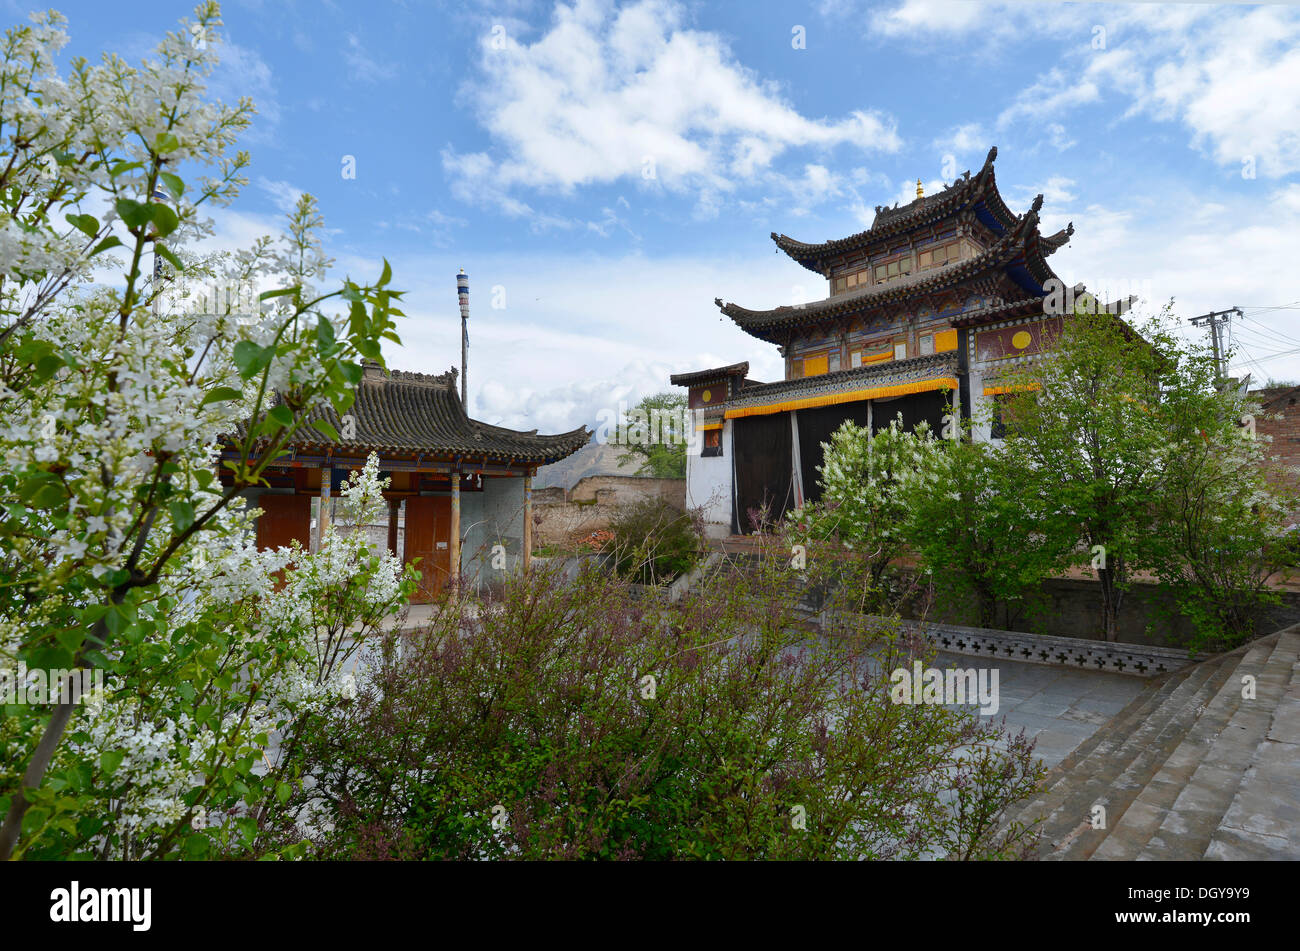 Lilacs in front of the monastery building built in the traditional architectural style, Tongren Monastery, Repkong, Qinghai Stock Photo